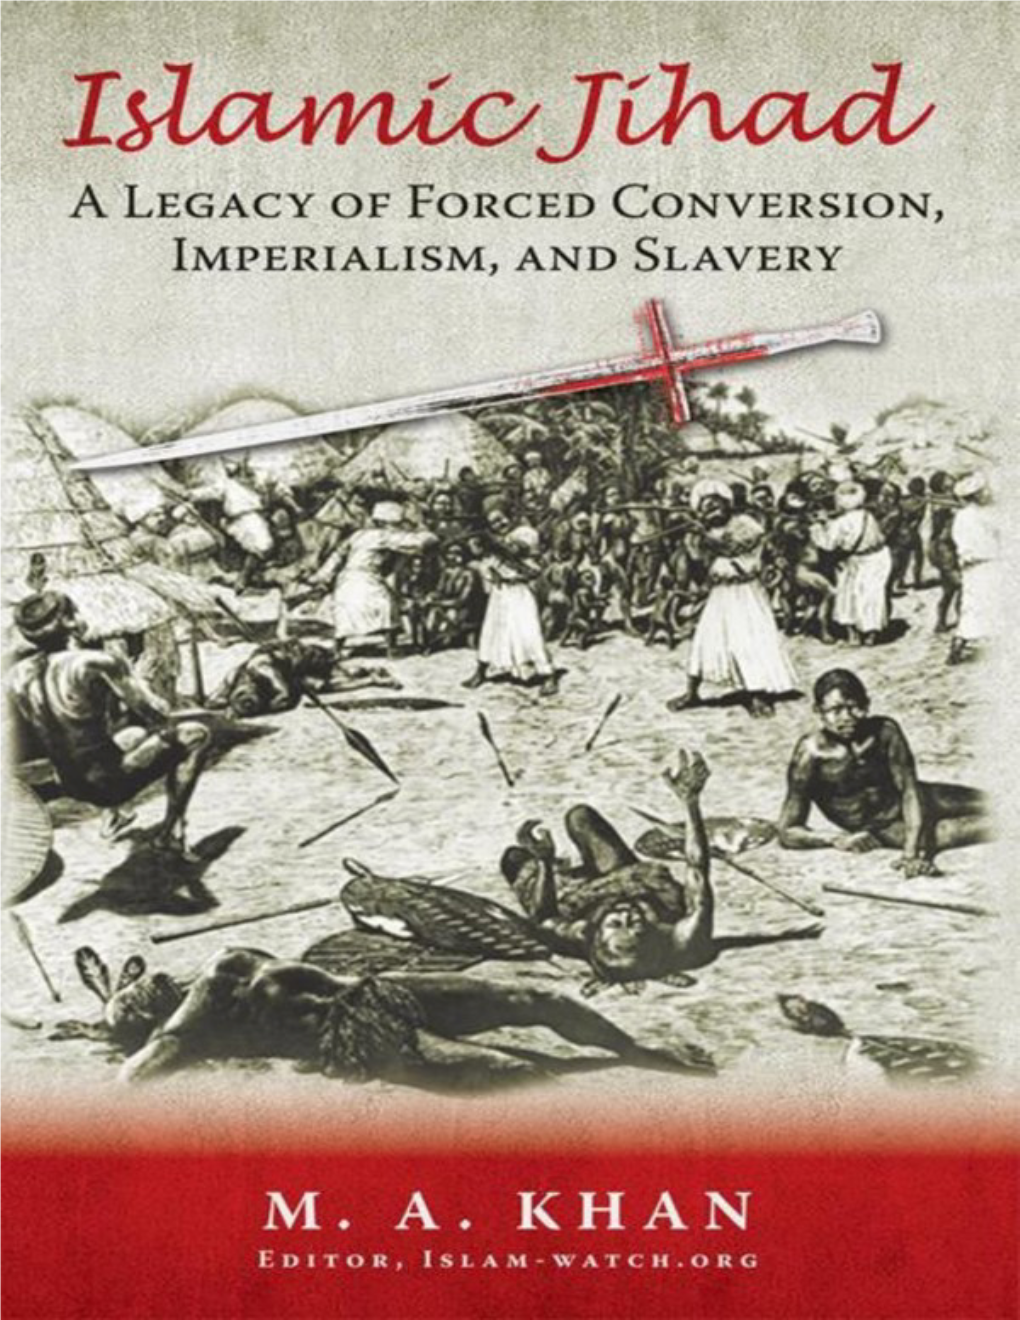 Islamic Jihad: a Legacy of Forced Conversion, Imperialism, and Slavery